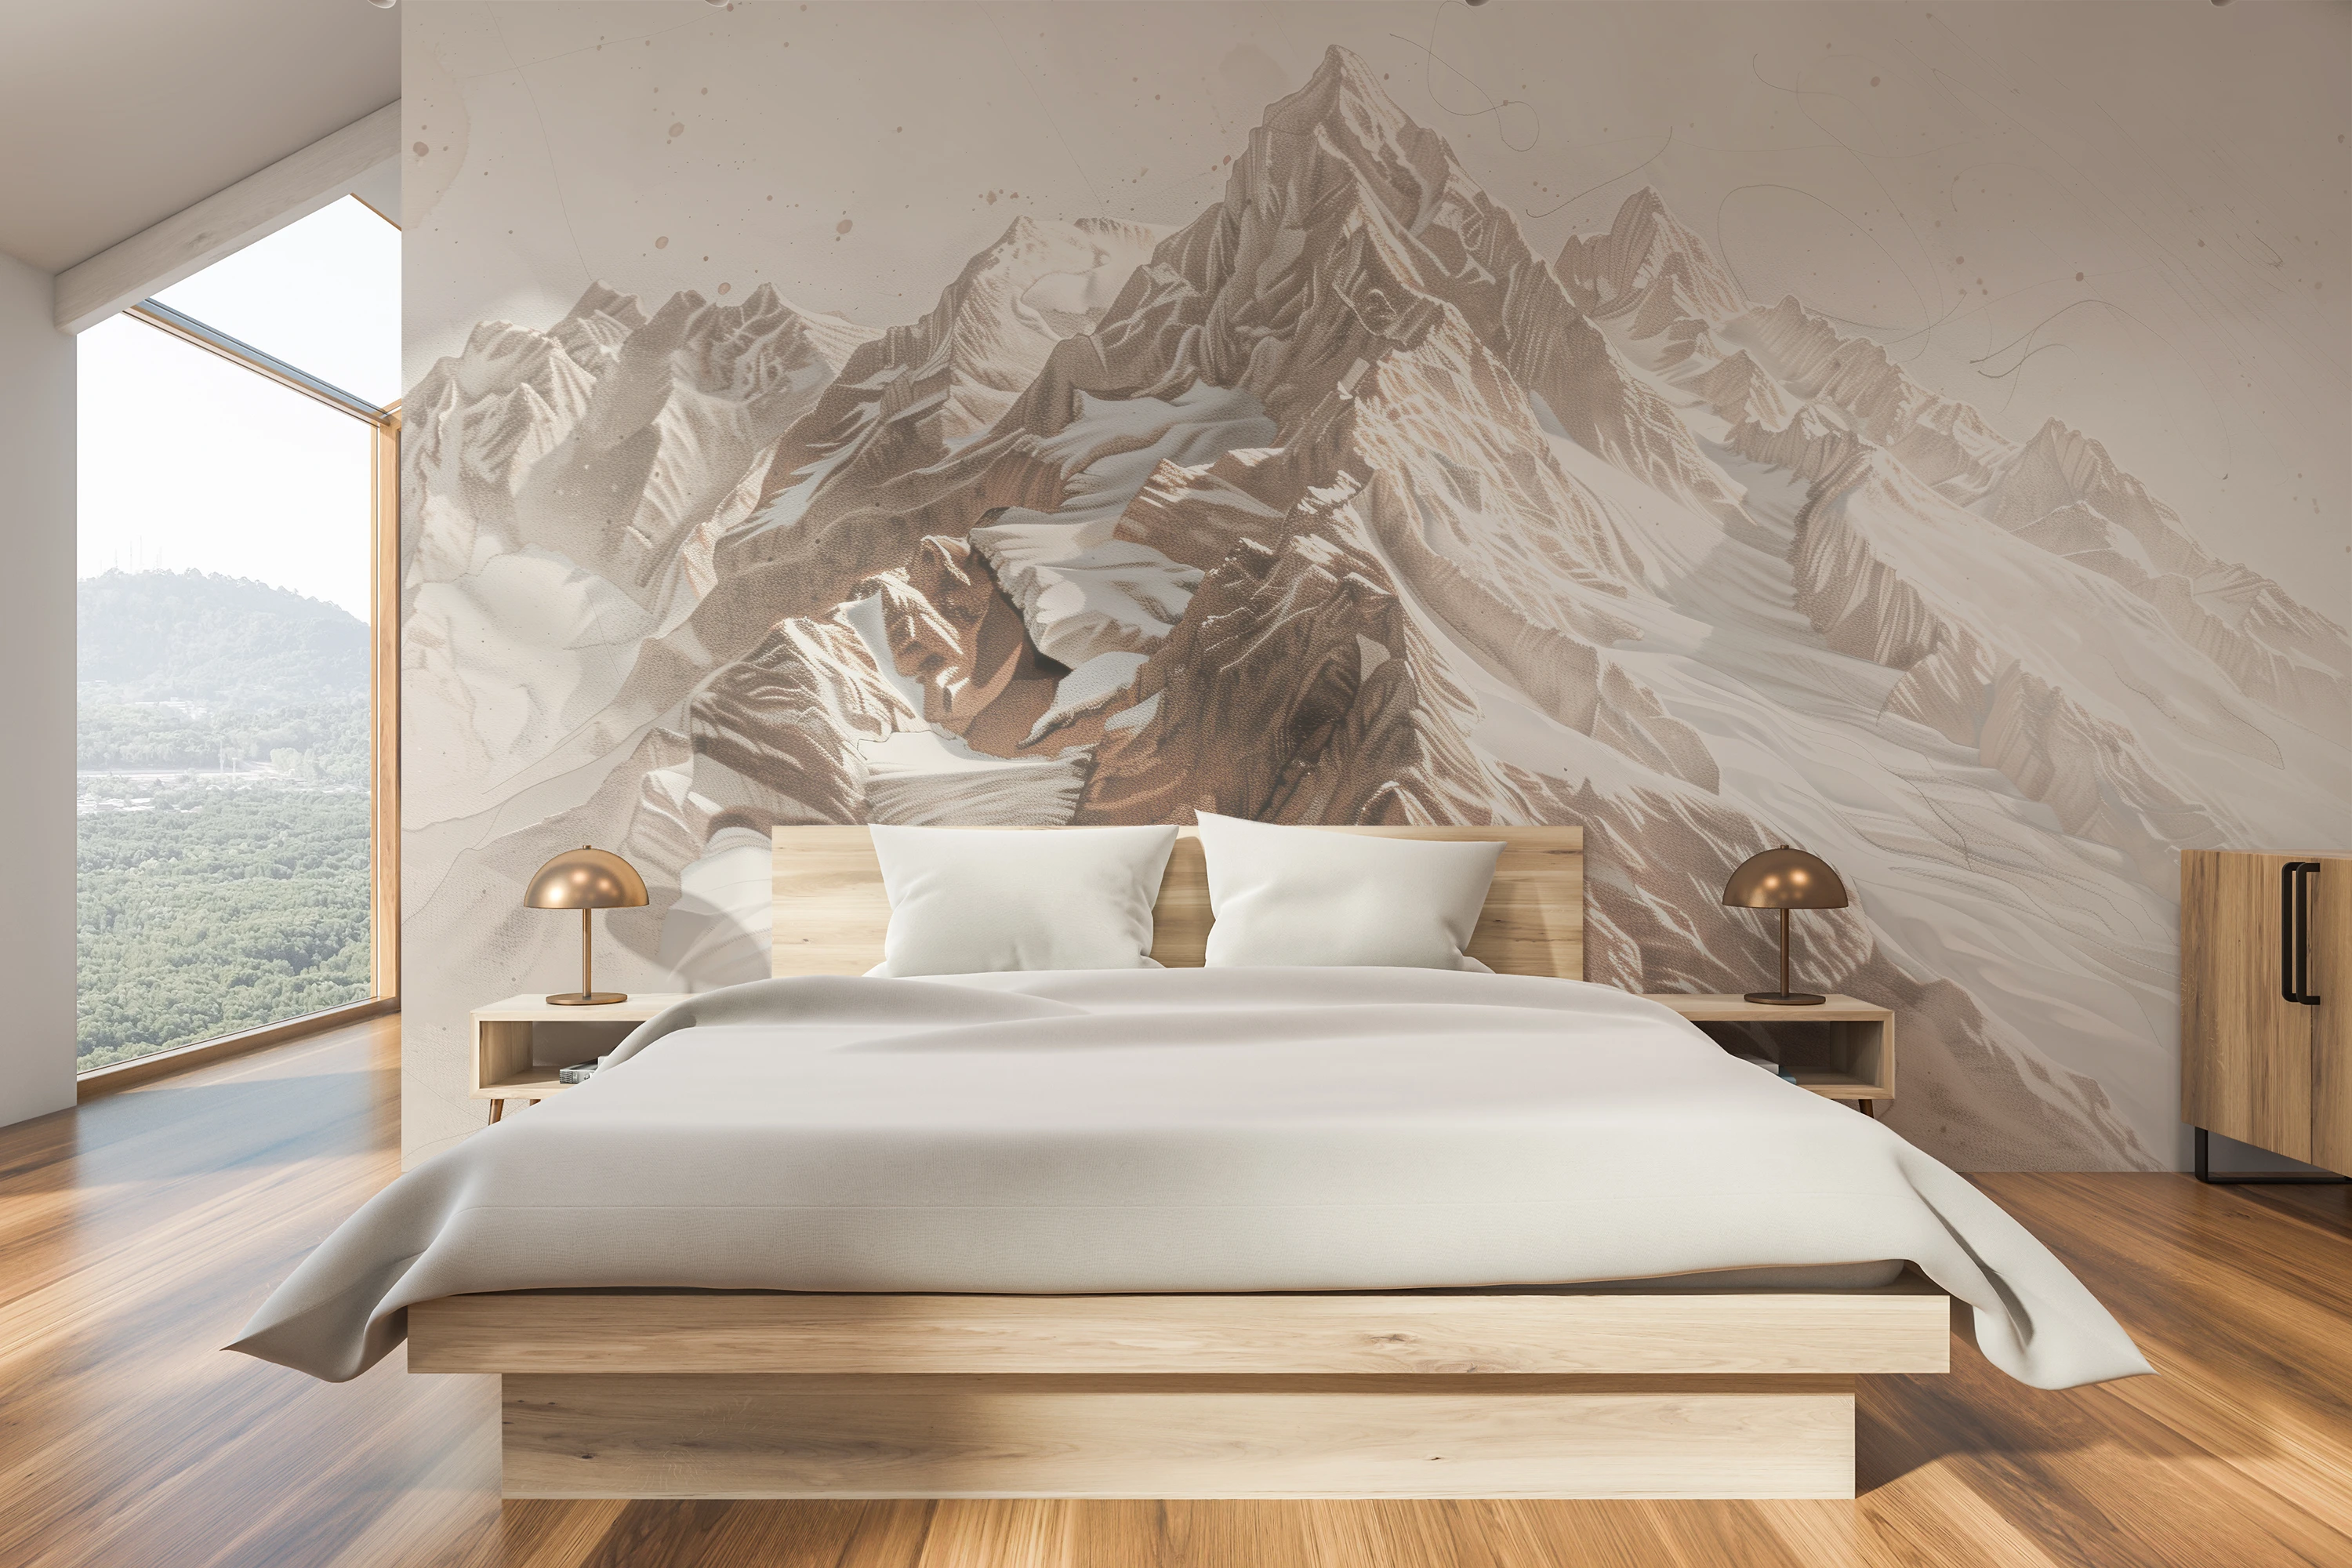 A delicate photo wallpaper presenting the raw beauty of mountain peaks in subtle beige and white tones that give the space lightness and elegance.